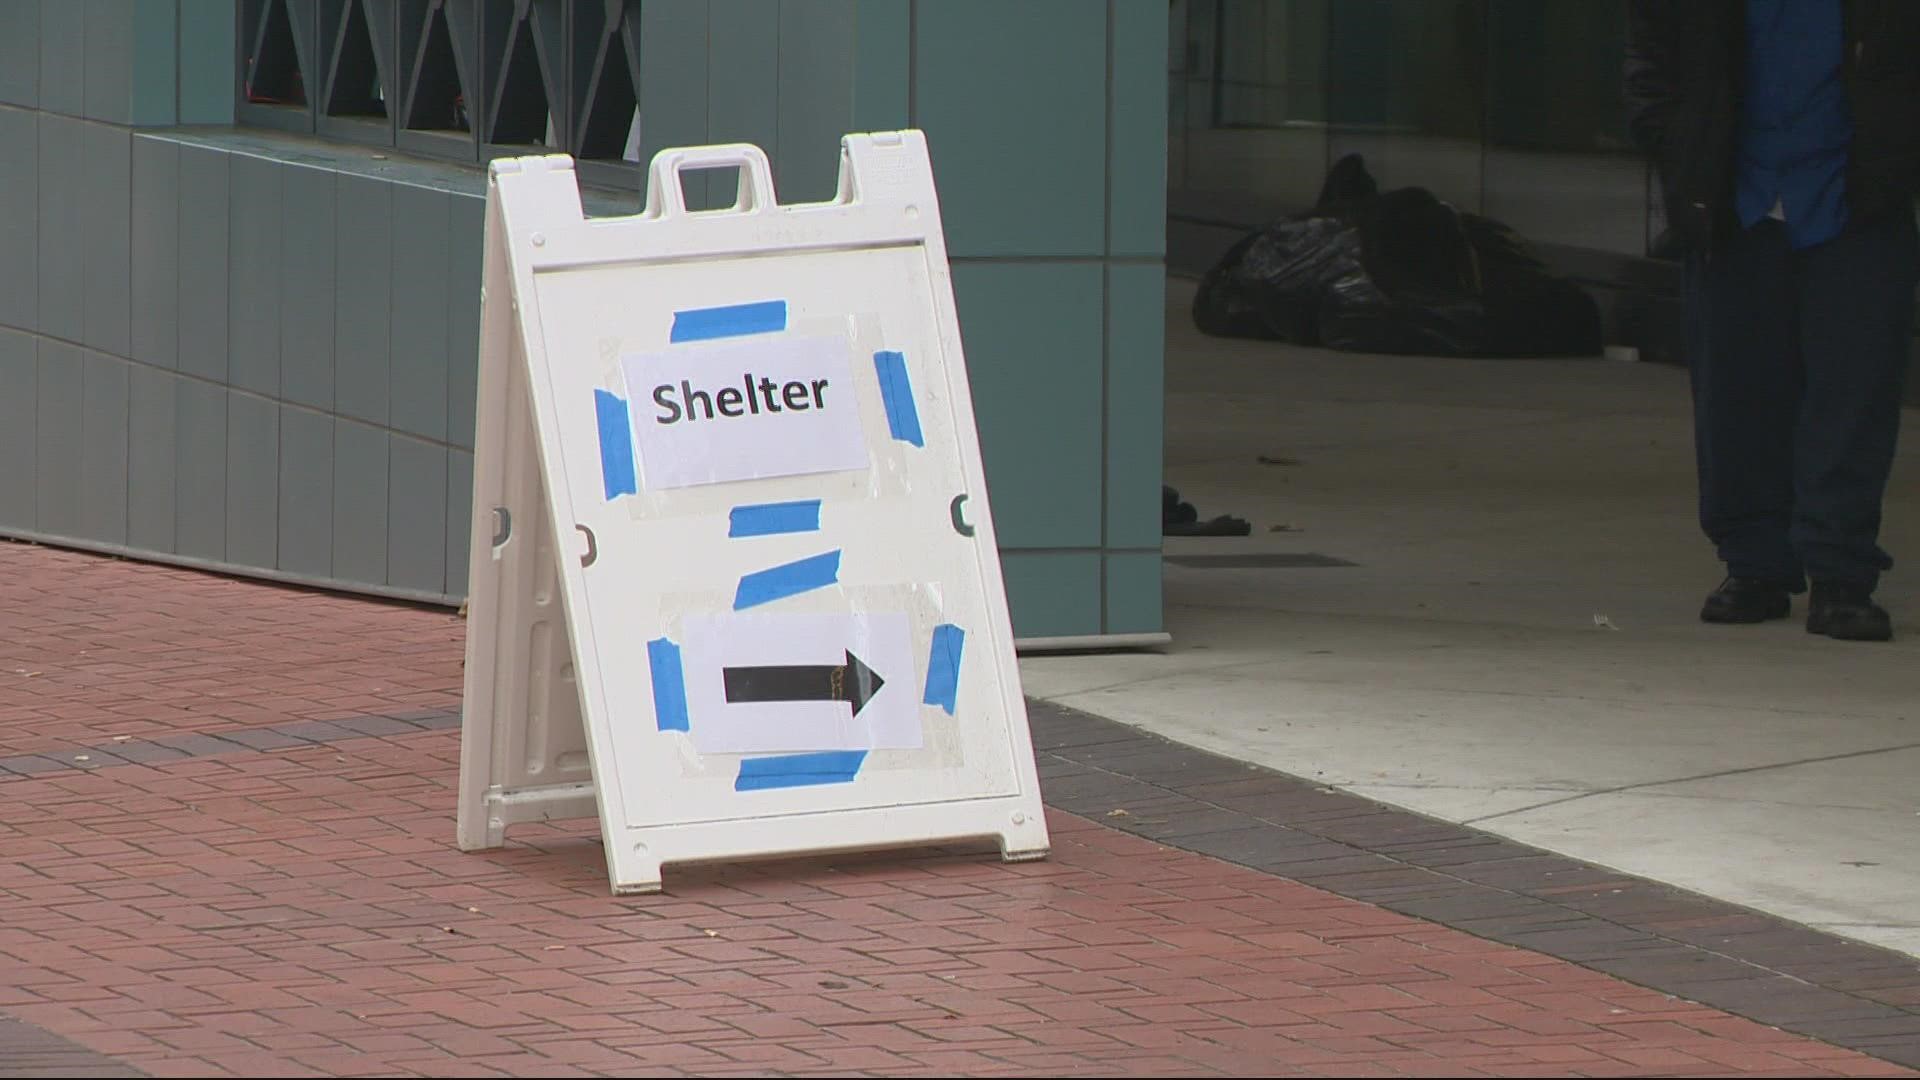 As winter weather persists, and more approaches, warming shelters open to help save lives.